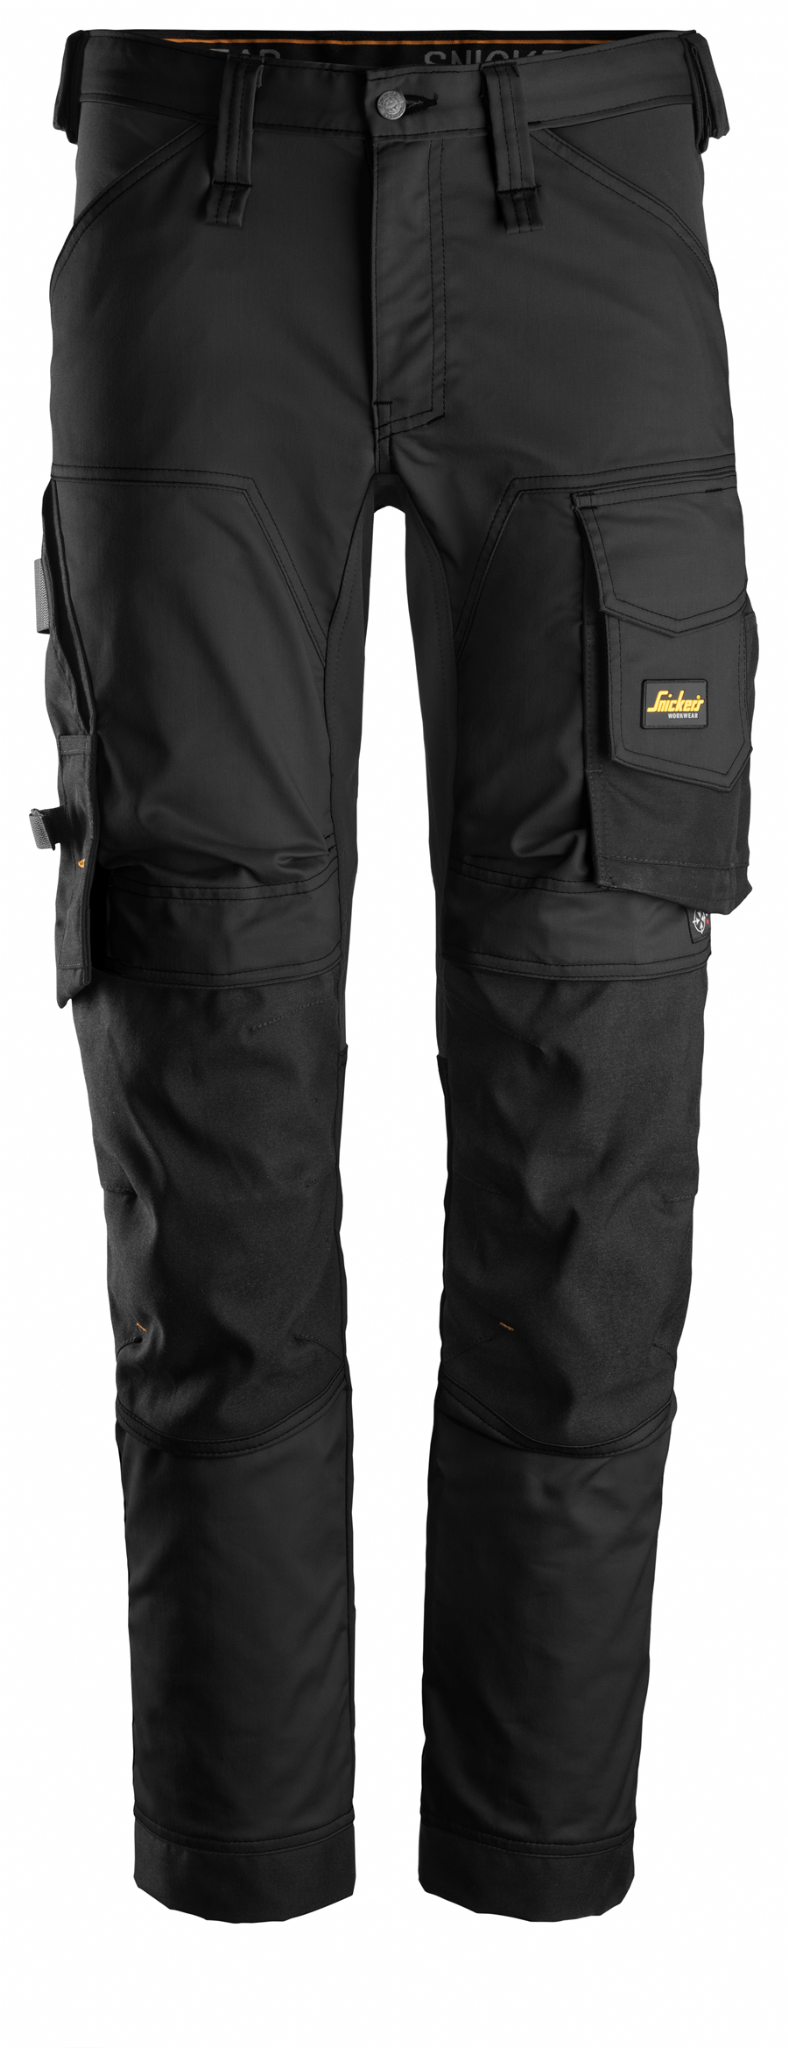 Class 2, Stretch Work Trousers Holster Pockets | Snickers Workwear